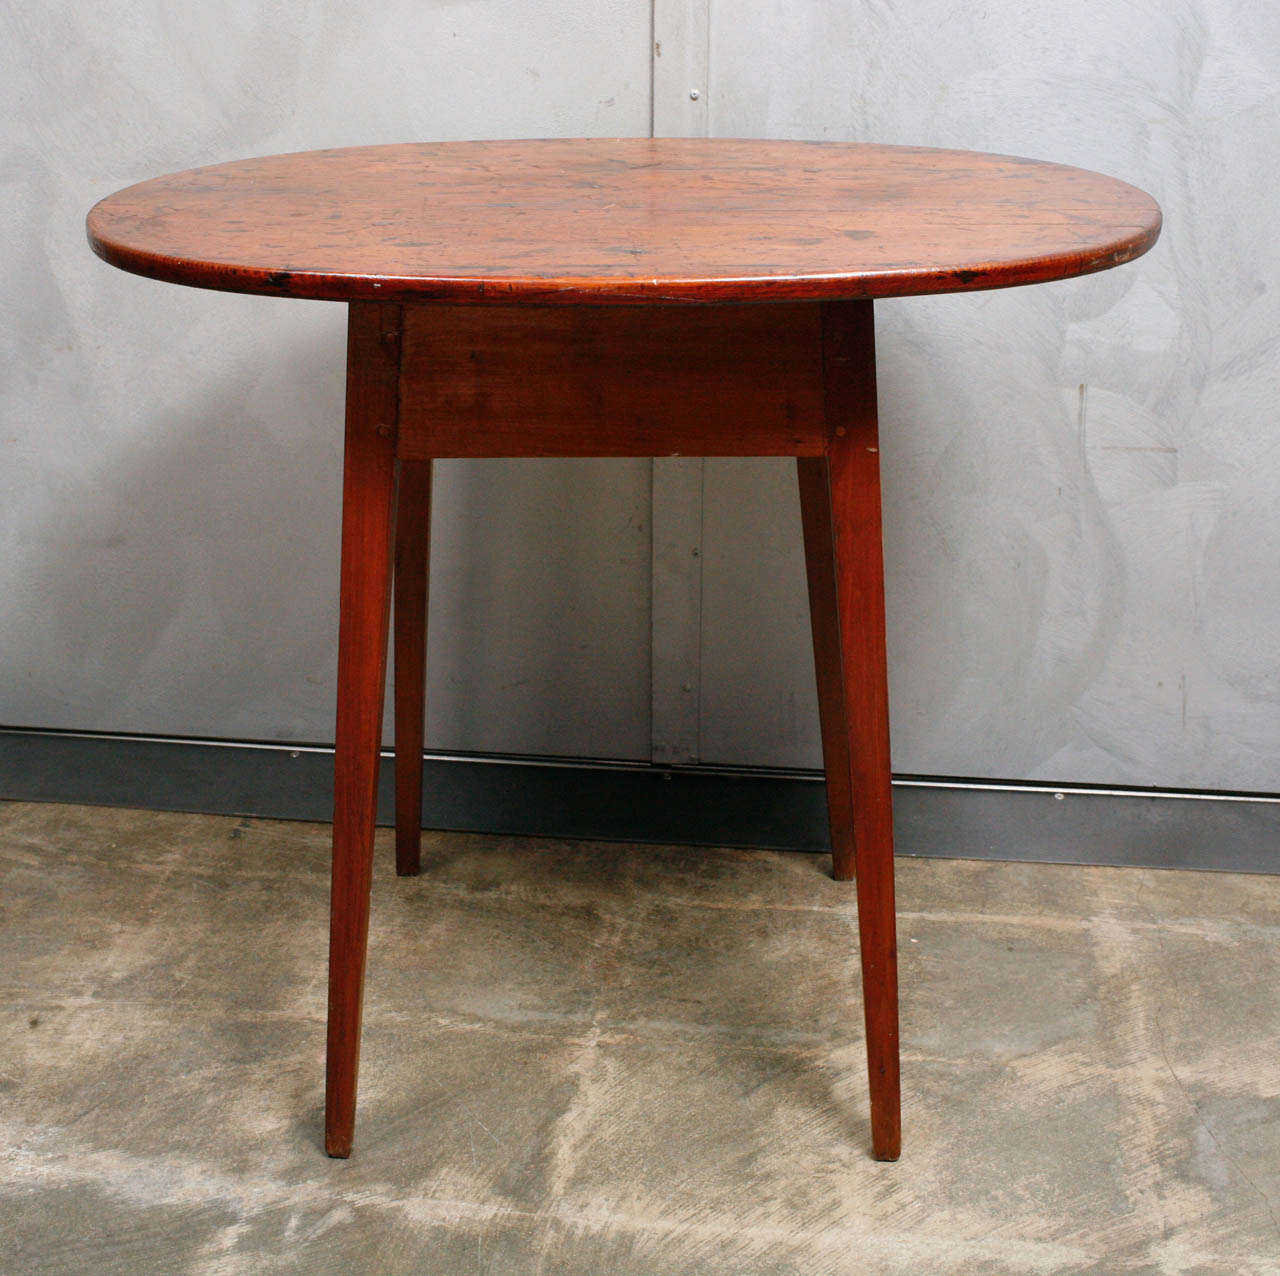 This is a elegant and sturdy little American tavern table with a nicely proportioned table skirt, four tapered legs and a distressed top. The embedded markings and scratches on the table top are signs of heavy use. The table has been cleaned and